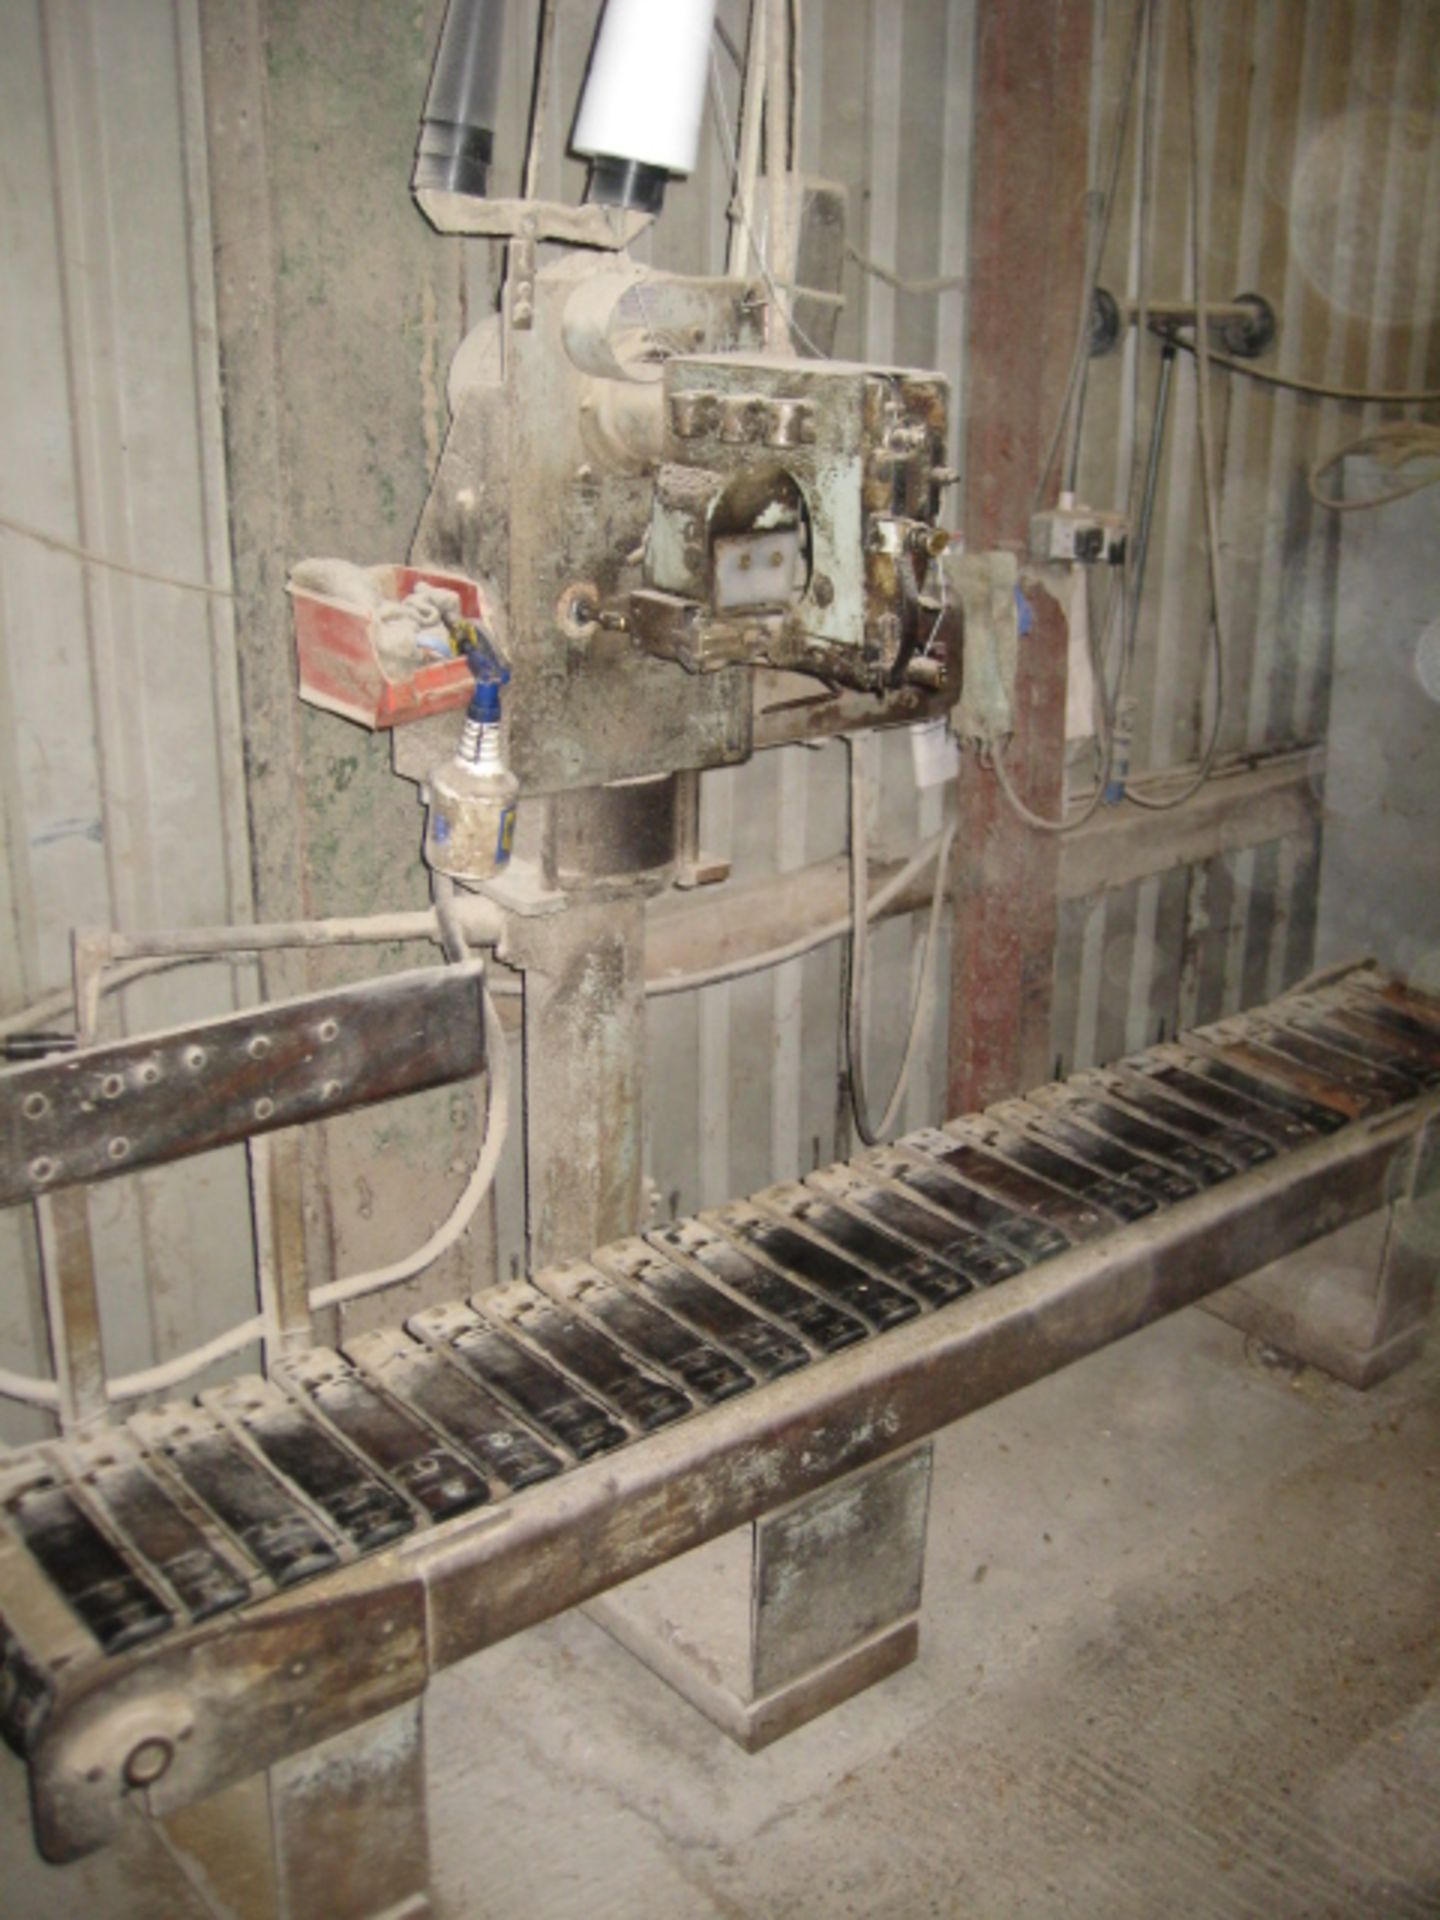 Stitchers & Sealers - Medway Stitcher and Bag Conveyor (UCPE 6255) Price - £1500 Please read the